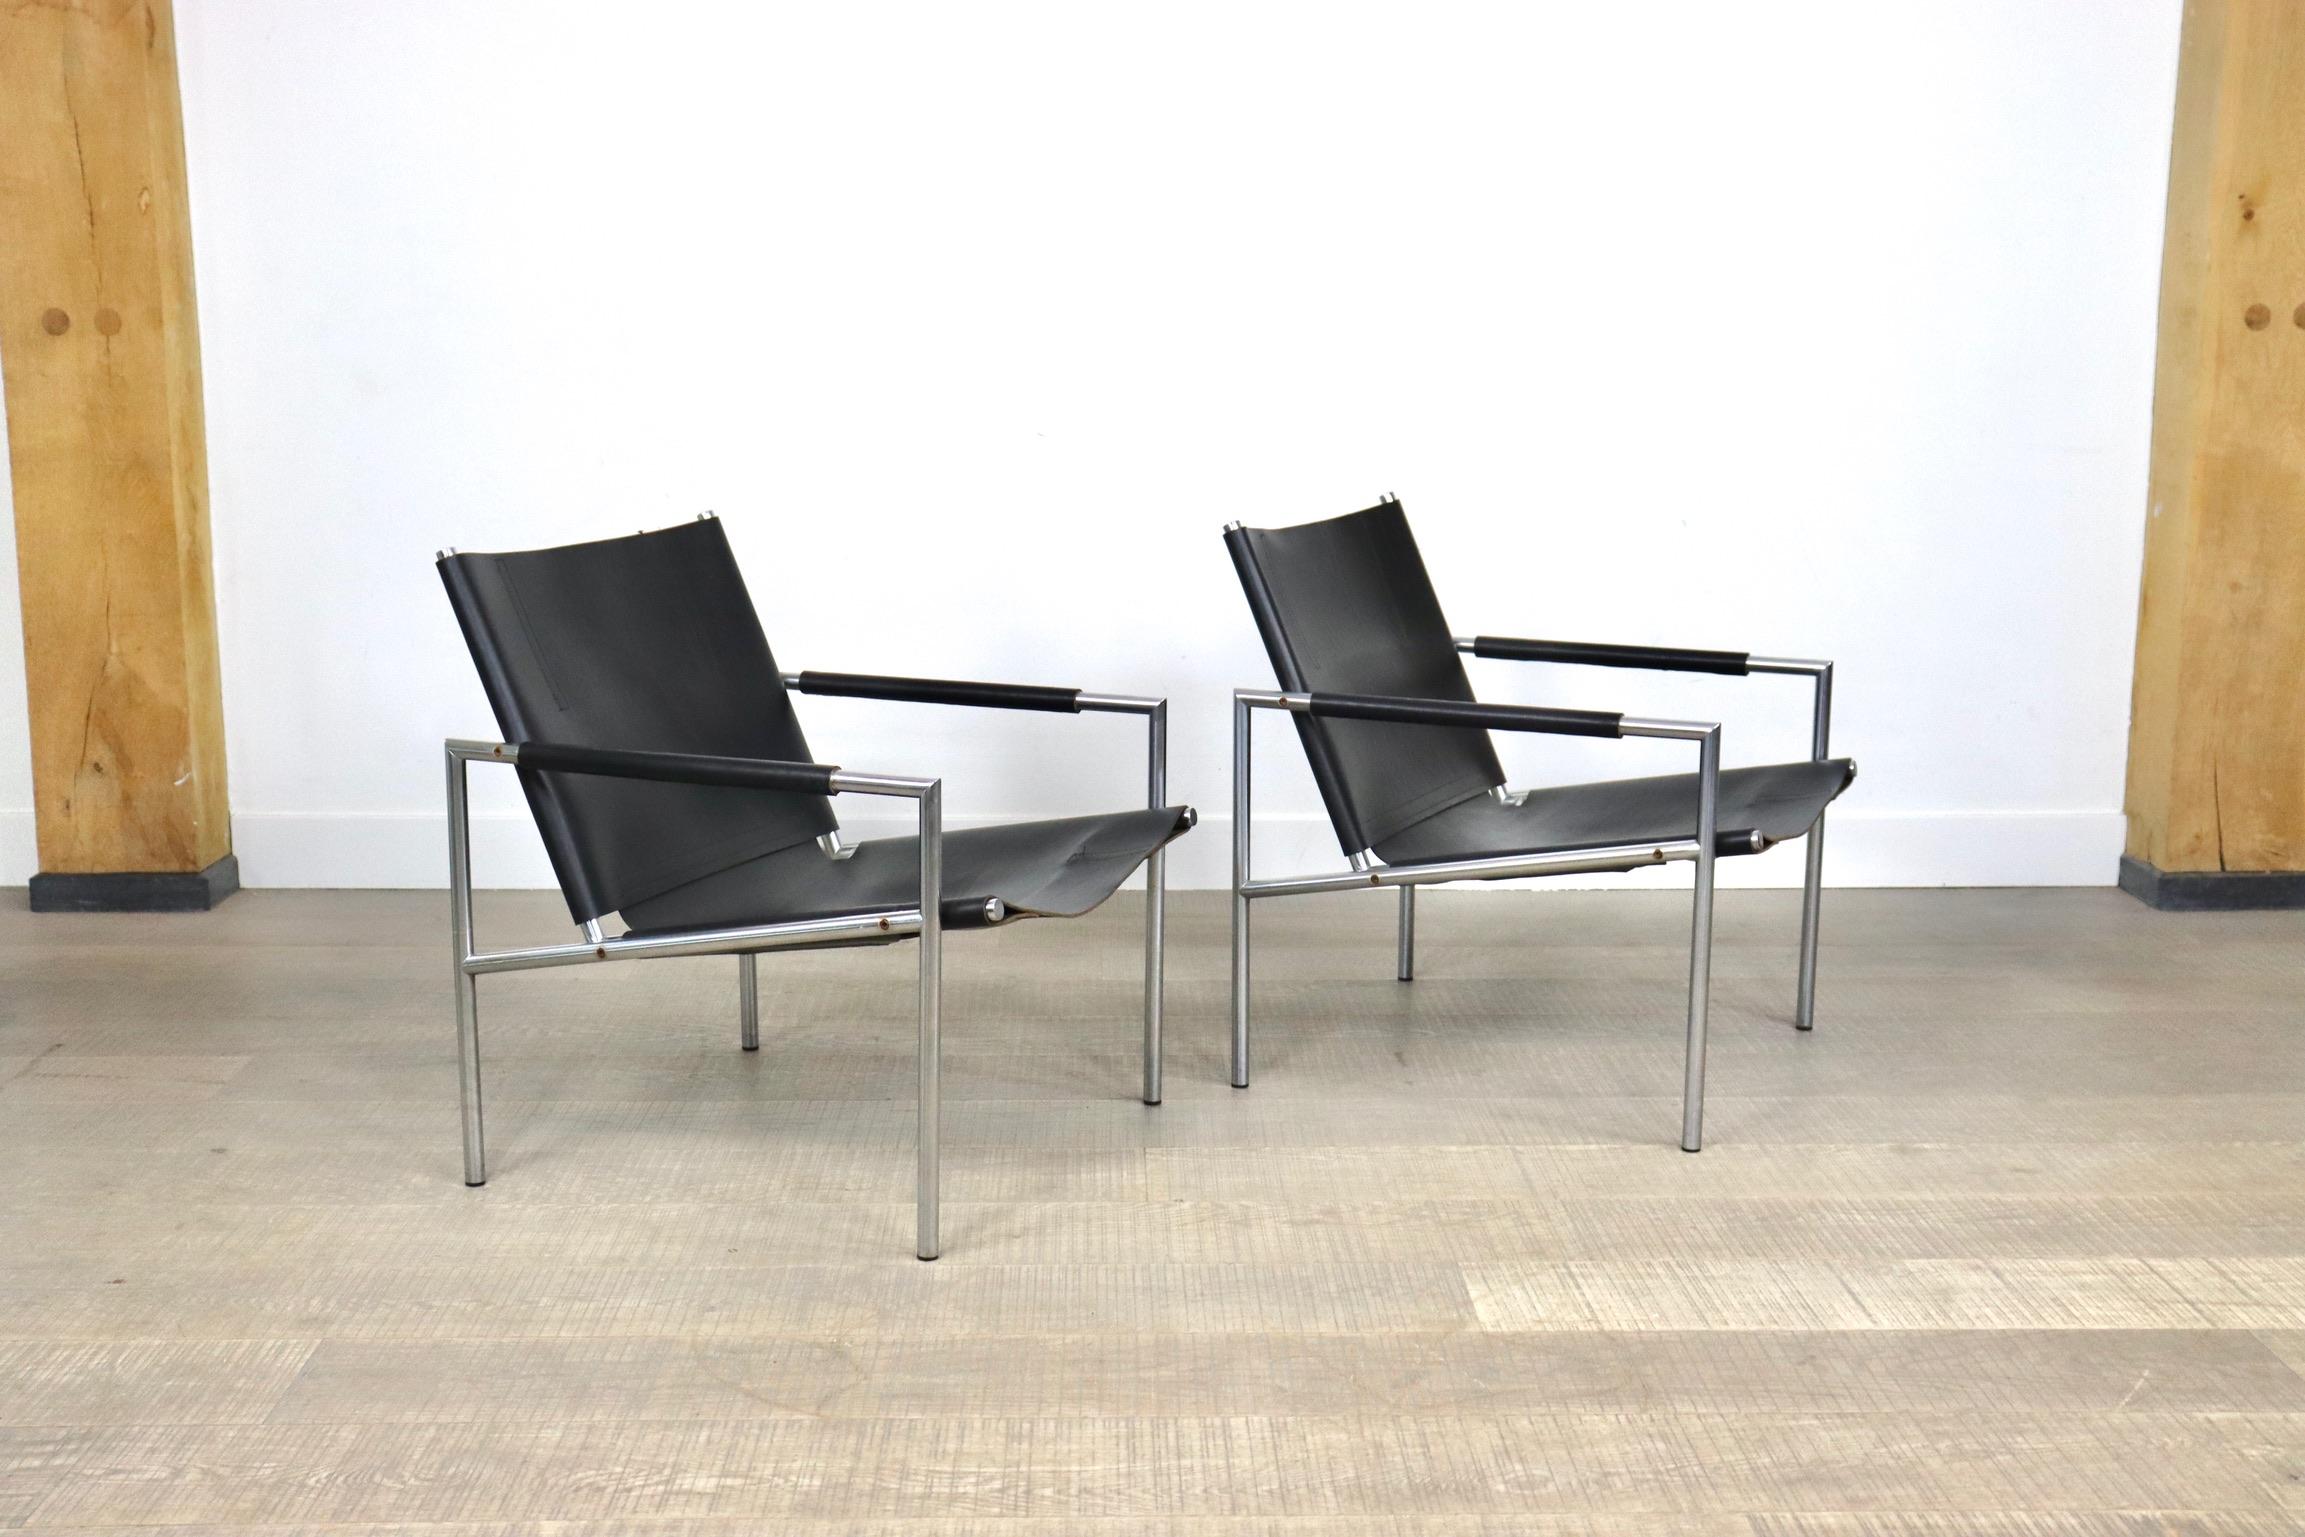 Stainless Steel Pair of SZ02 Easy chairs by Martin Visser for Spectrum, 1970s